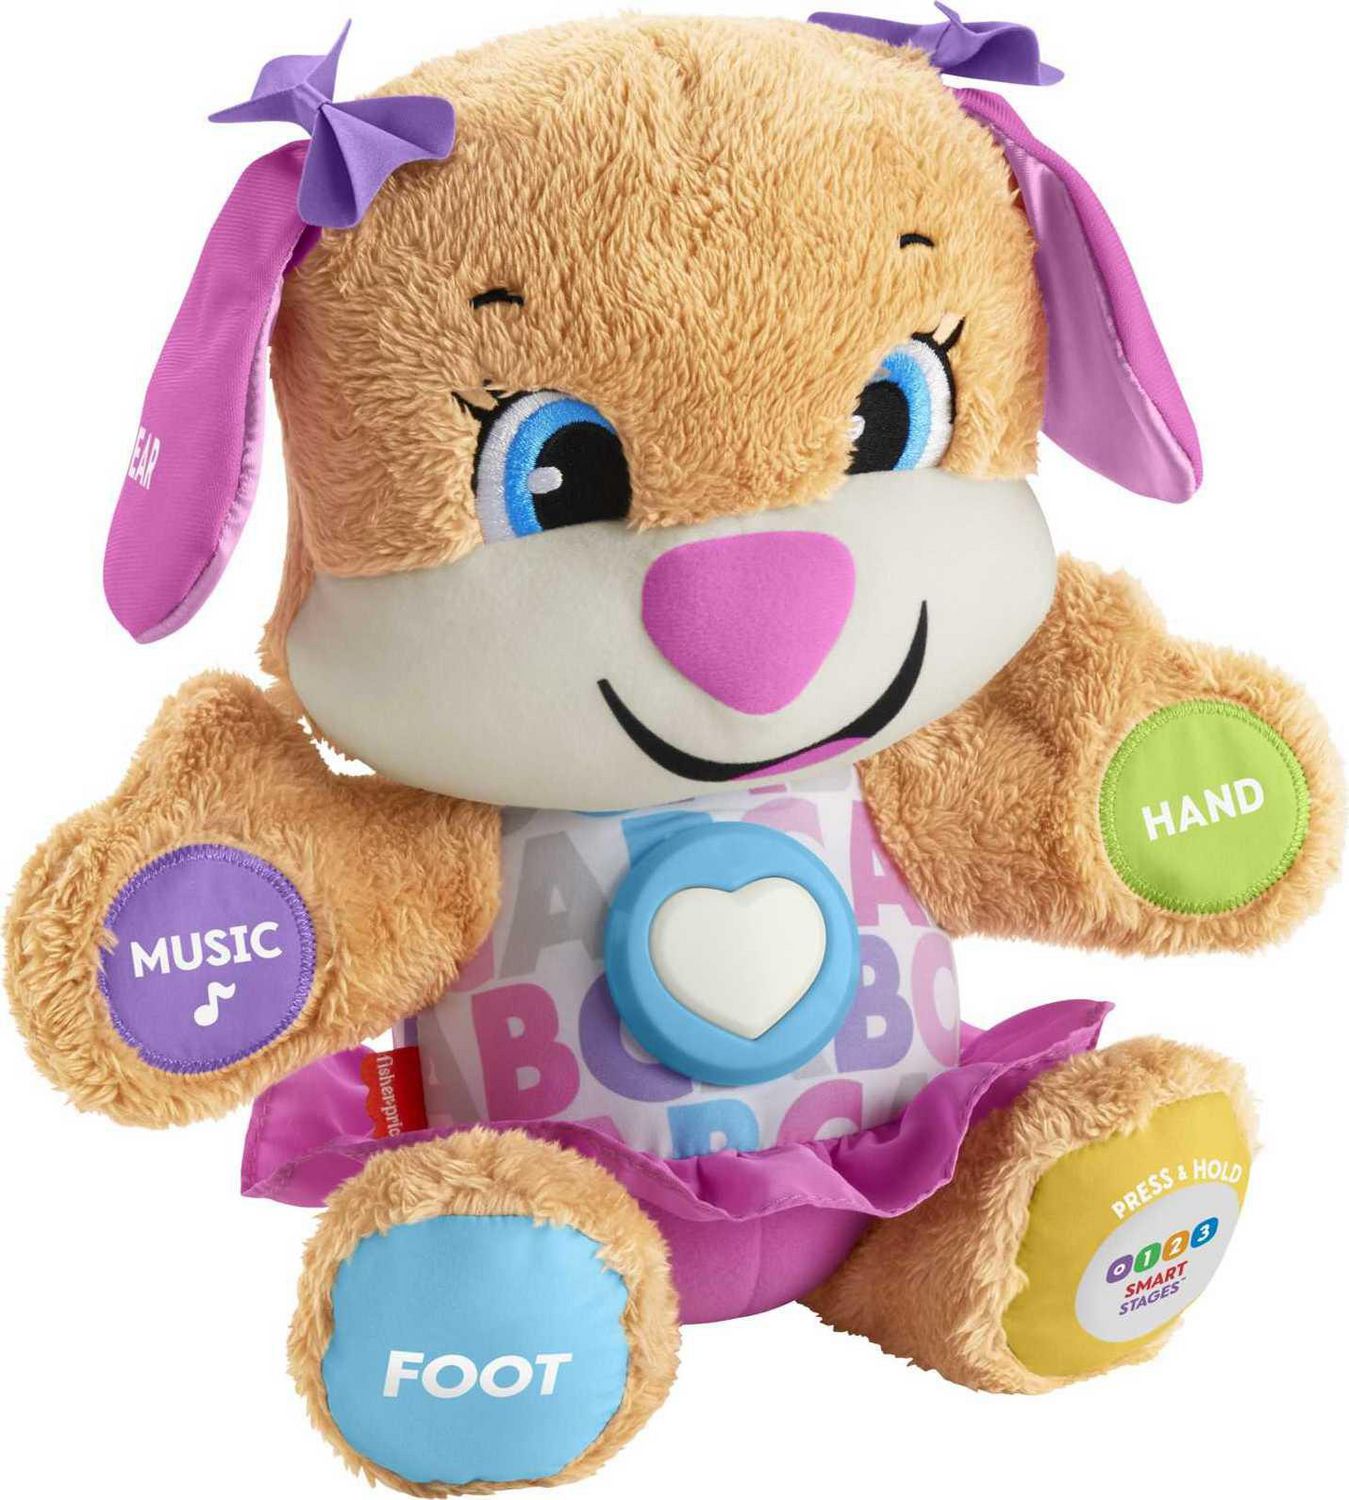 peluche sis fisher price